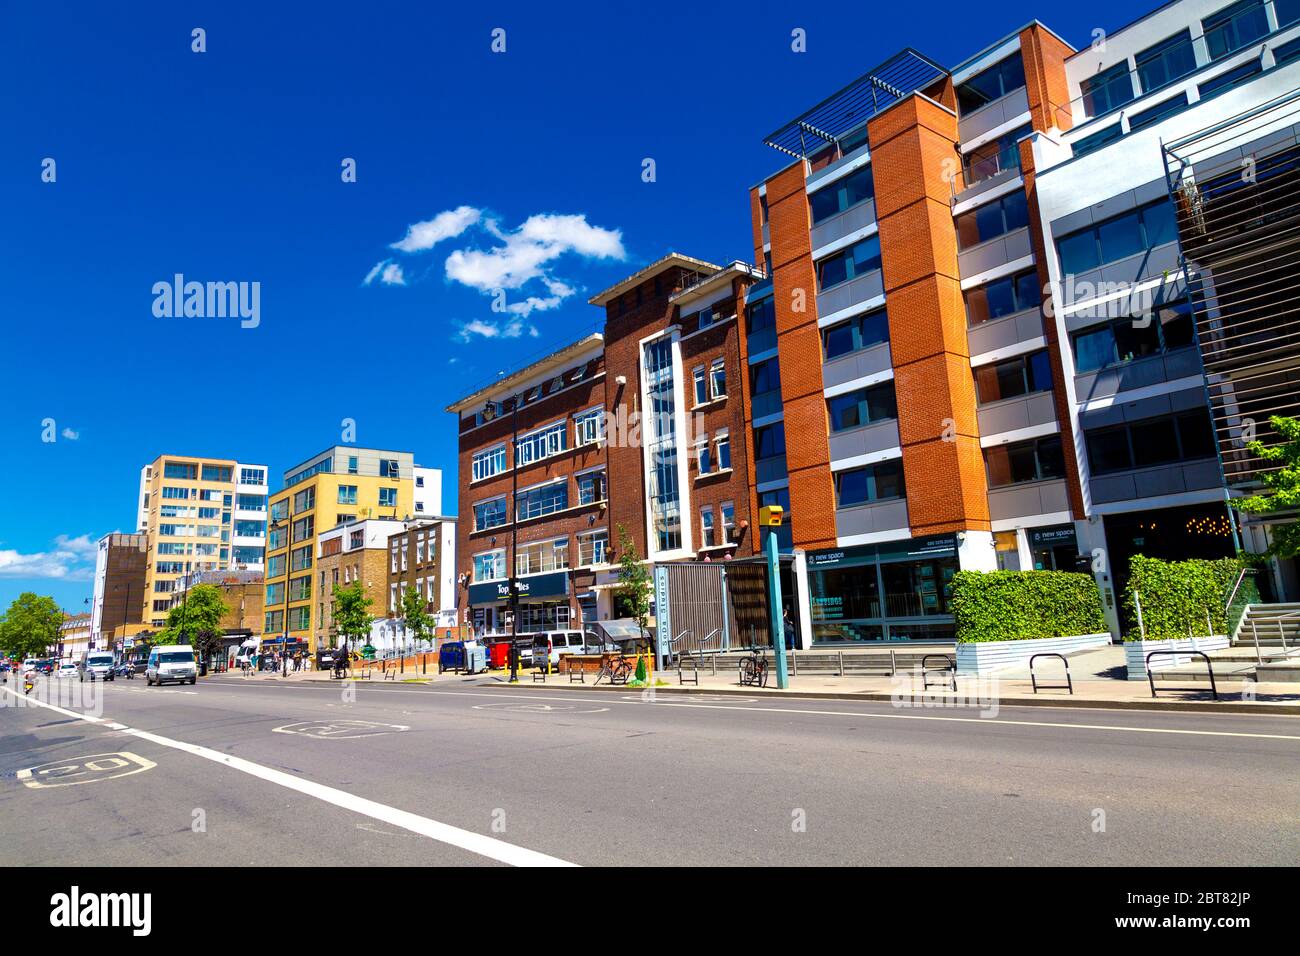 New and old residential houses along Kingsland Road in Haggerston, London, UK Stock Photo